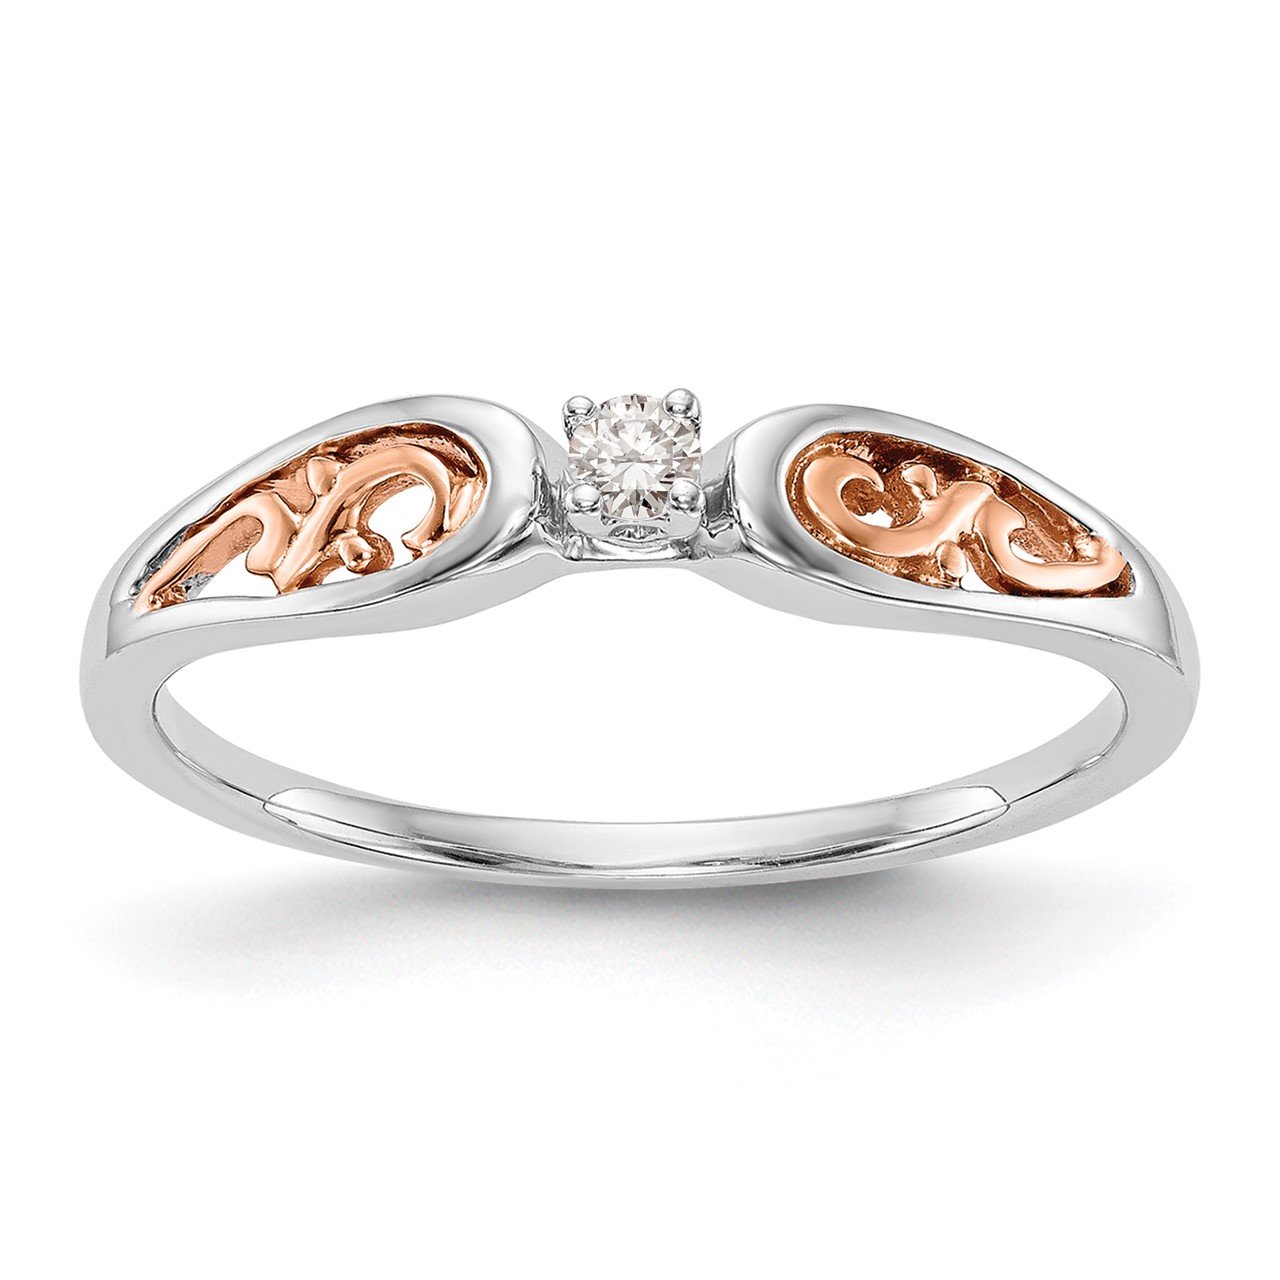 14K White Gold and Rose Gold Comp. Diamond Promise/Engagement Ring